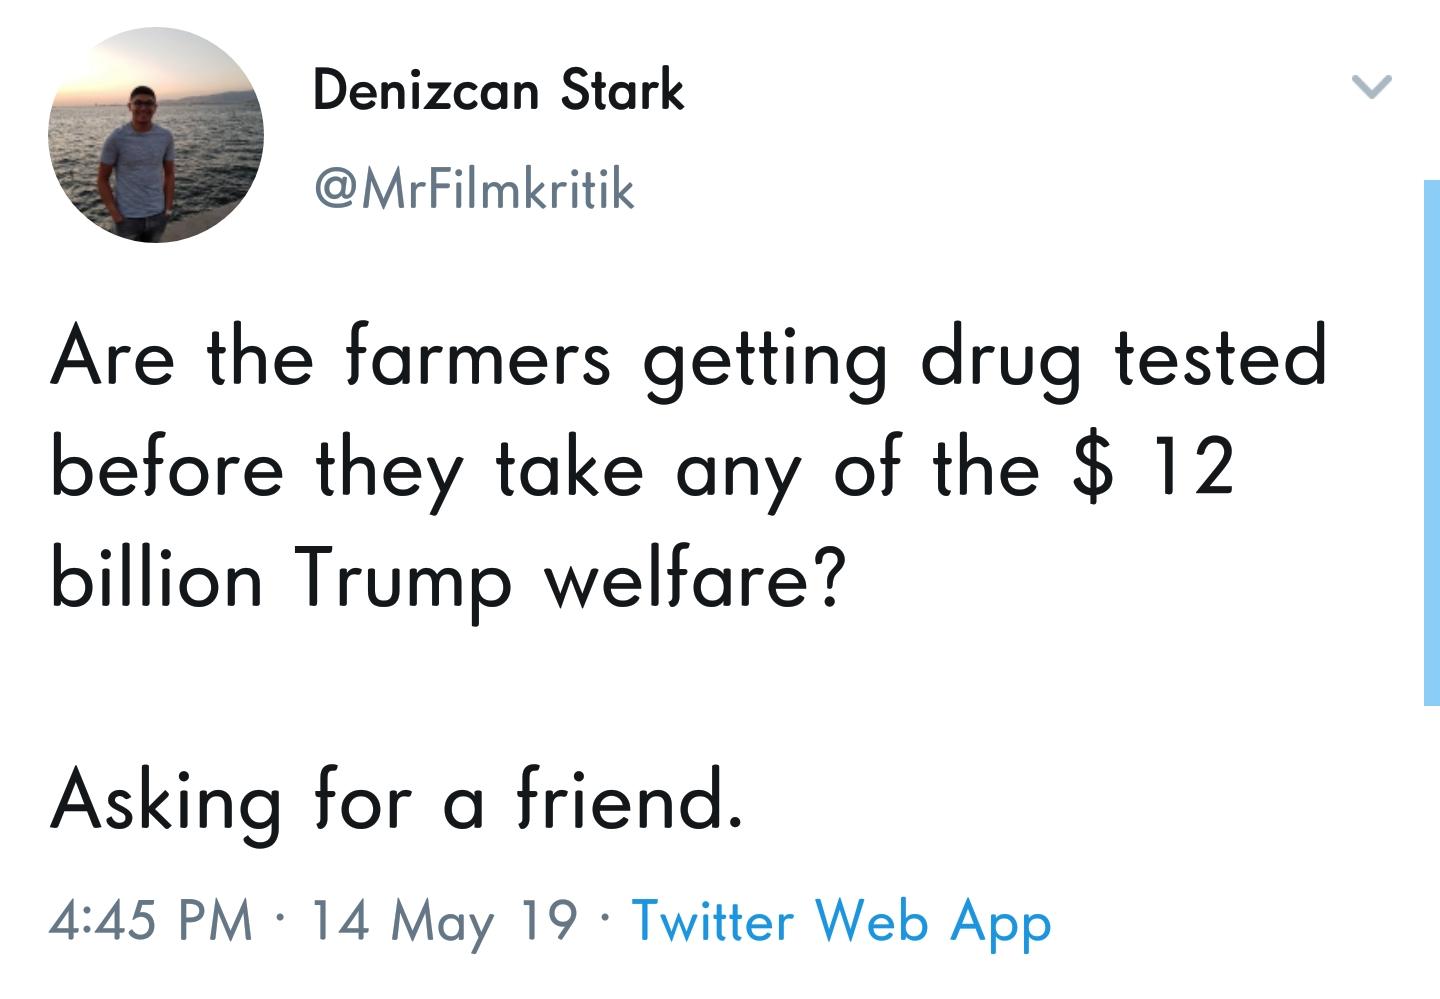 tweeted from gucci toilet - Denizcan Stark Are the farmers getting drug tested before they take any of the $ 12 billion Trump welfare? Asking for a friend. 14 May 19 Twitter Web App